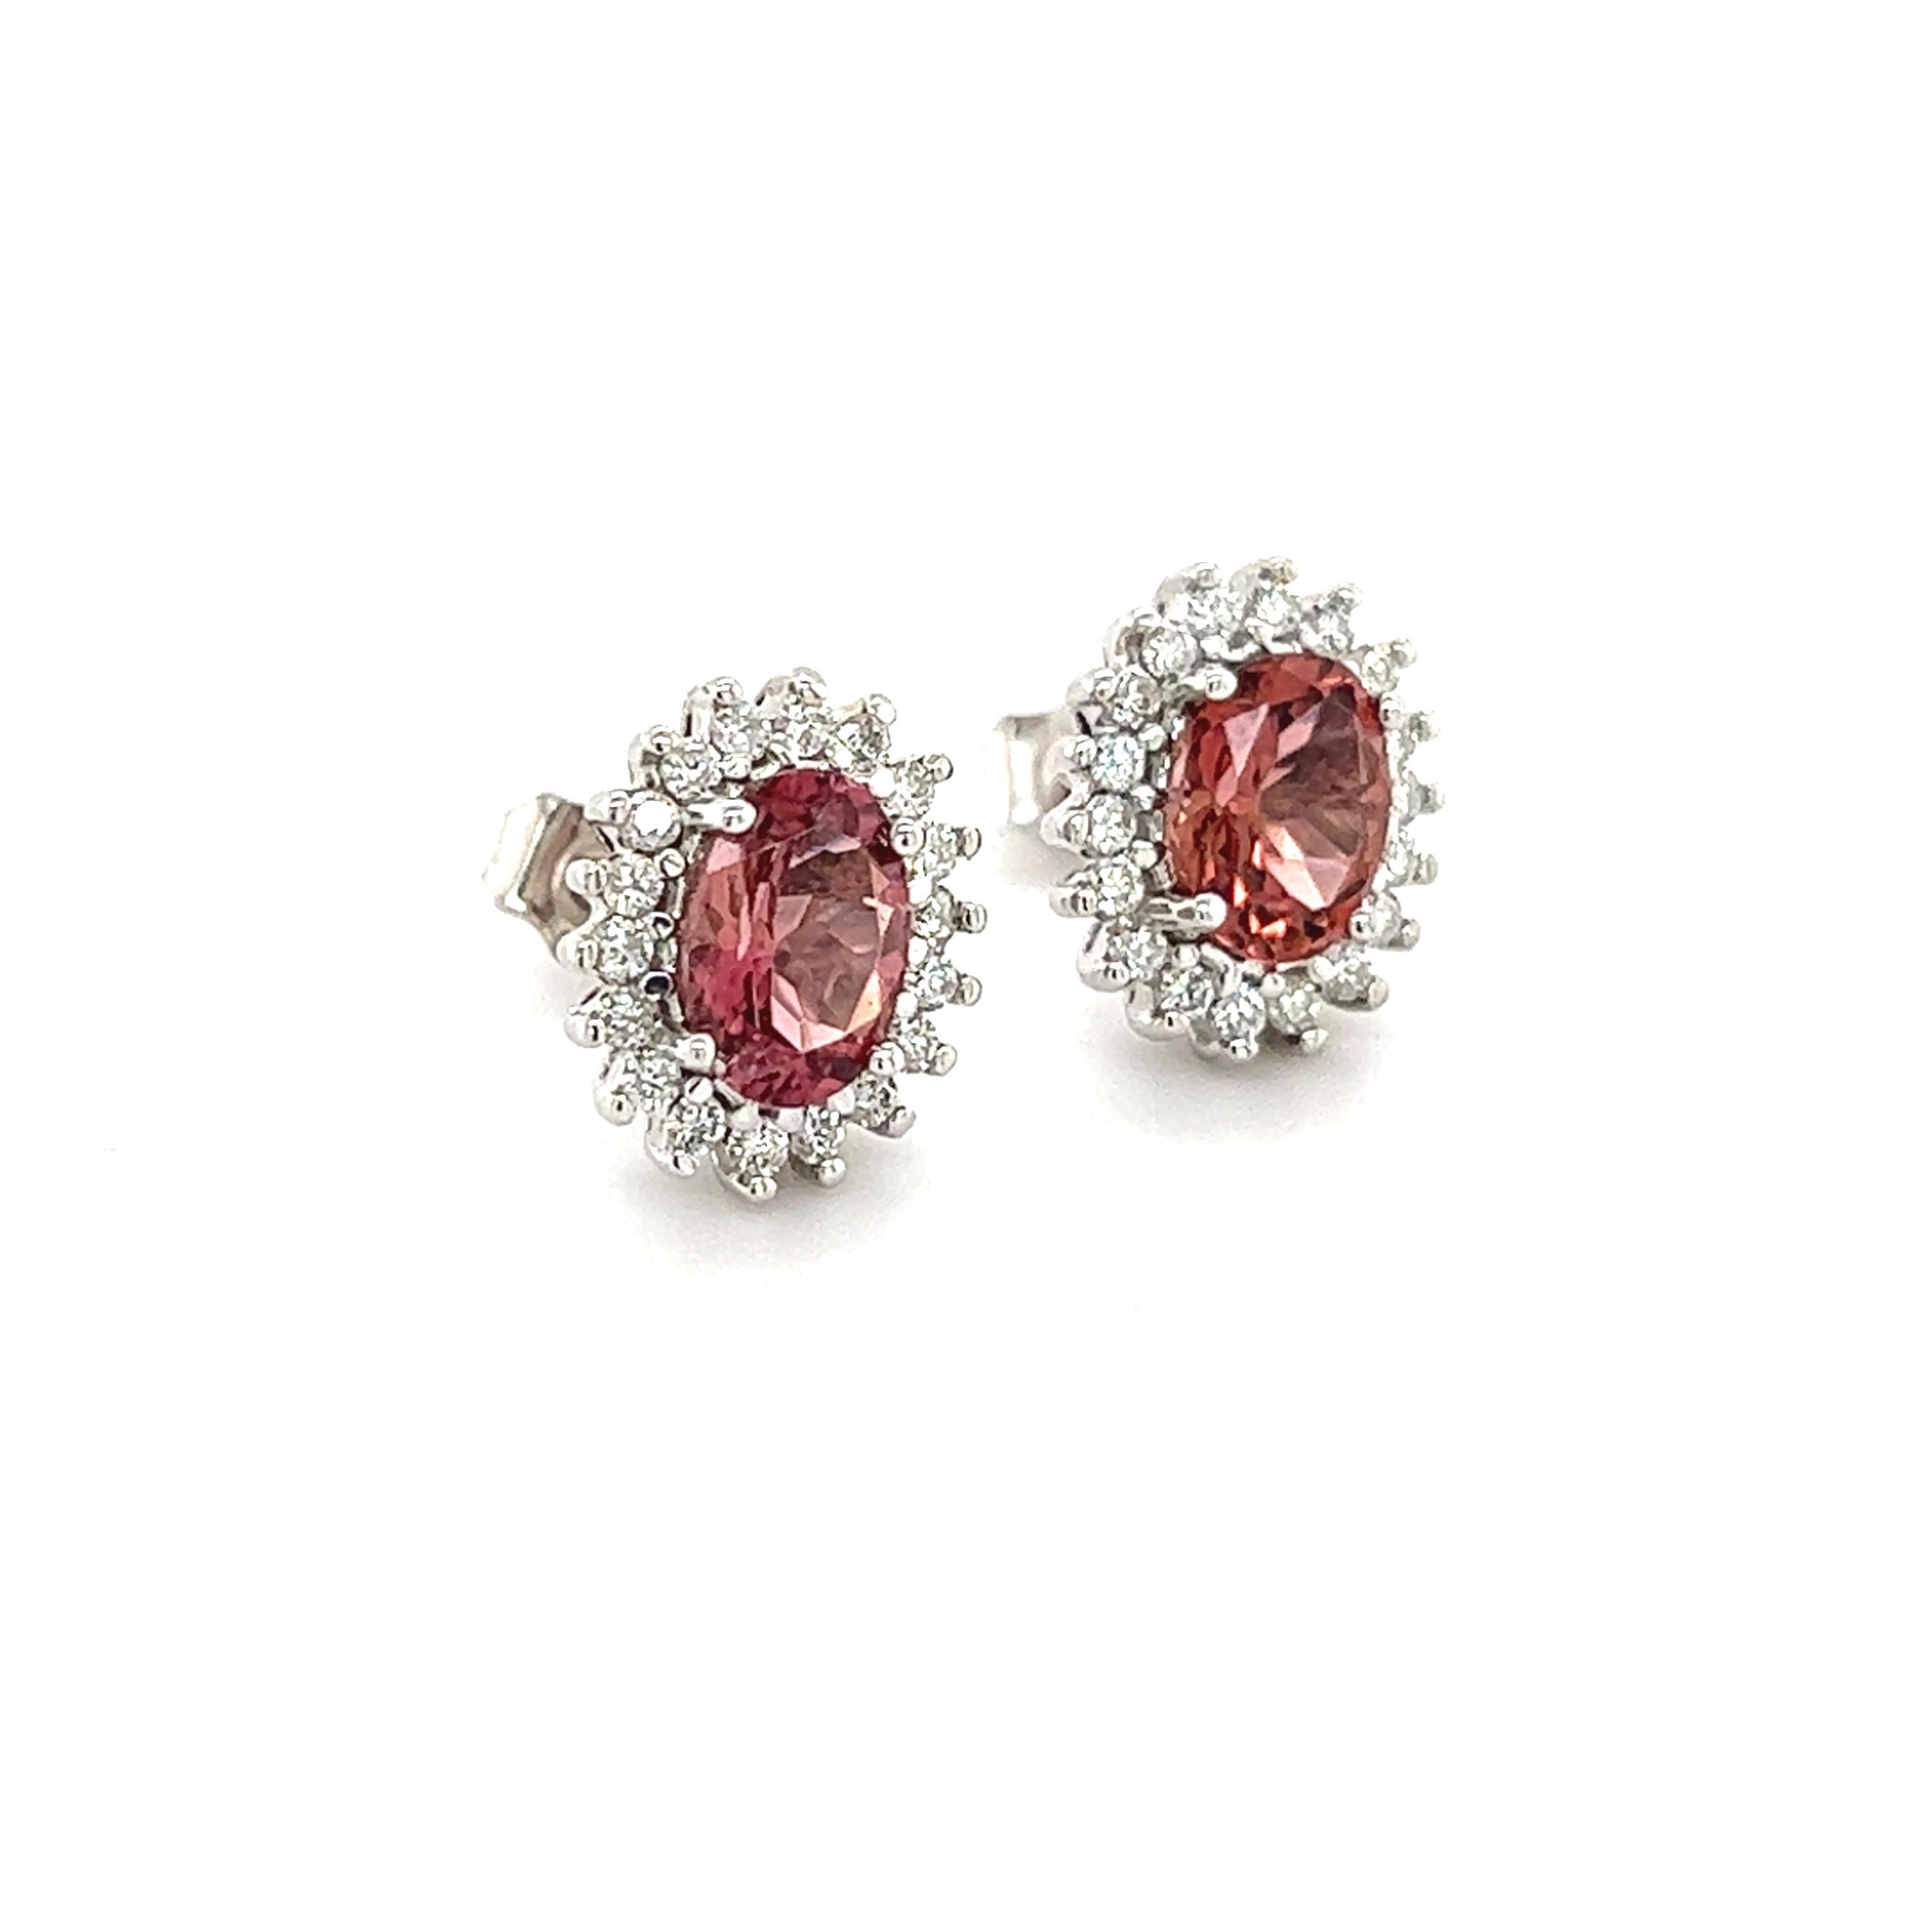 Natural Tourmaline Diamond Earrings 14k Gold 1.94 TCW Certified $3,950 215100

Nothing says, “I Love you” more than Diamonds and Pearls!

These Tourmaline earrings have been Certified, Inspected, and Appraised by Gemological Appraisal